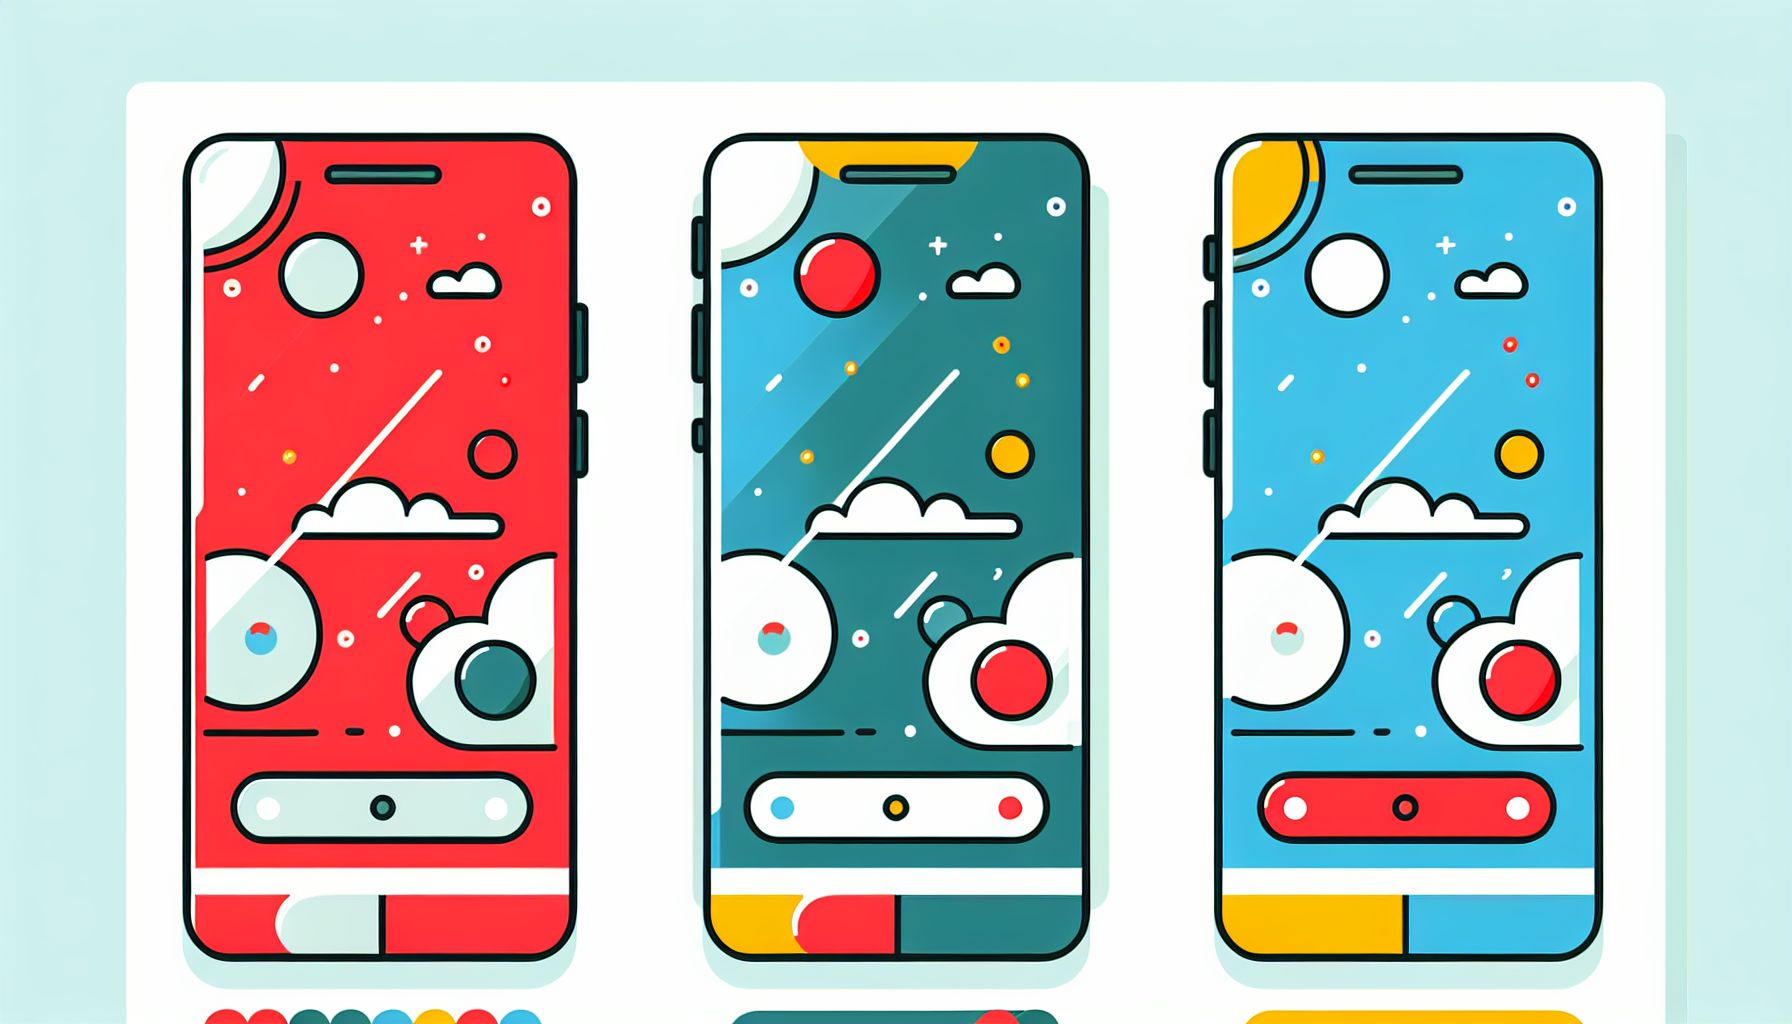 Smartphone in flat illustration style and white background, red #f47574, green #88c7a8, yellow #fcc44b, and blue #645bc8 colors.